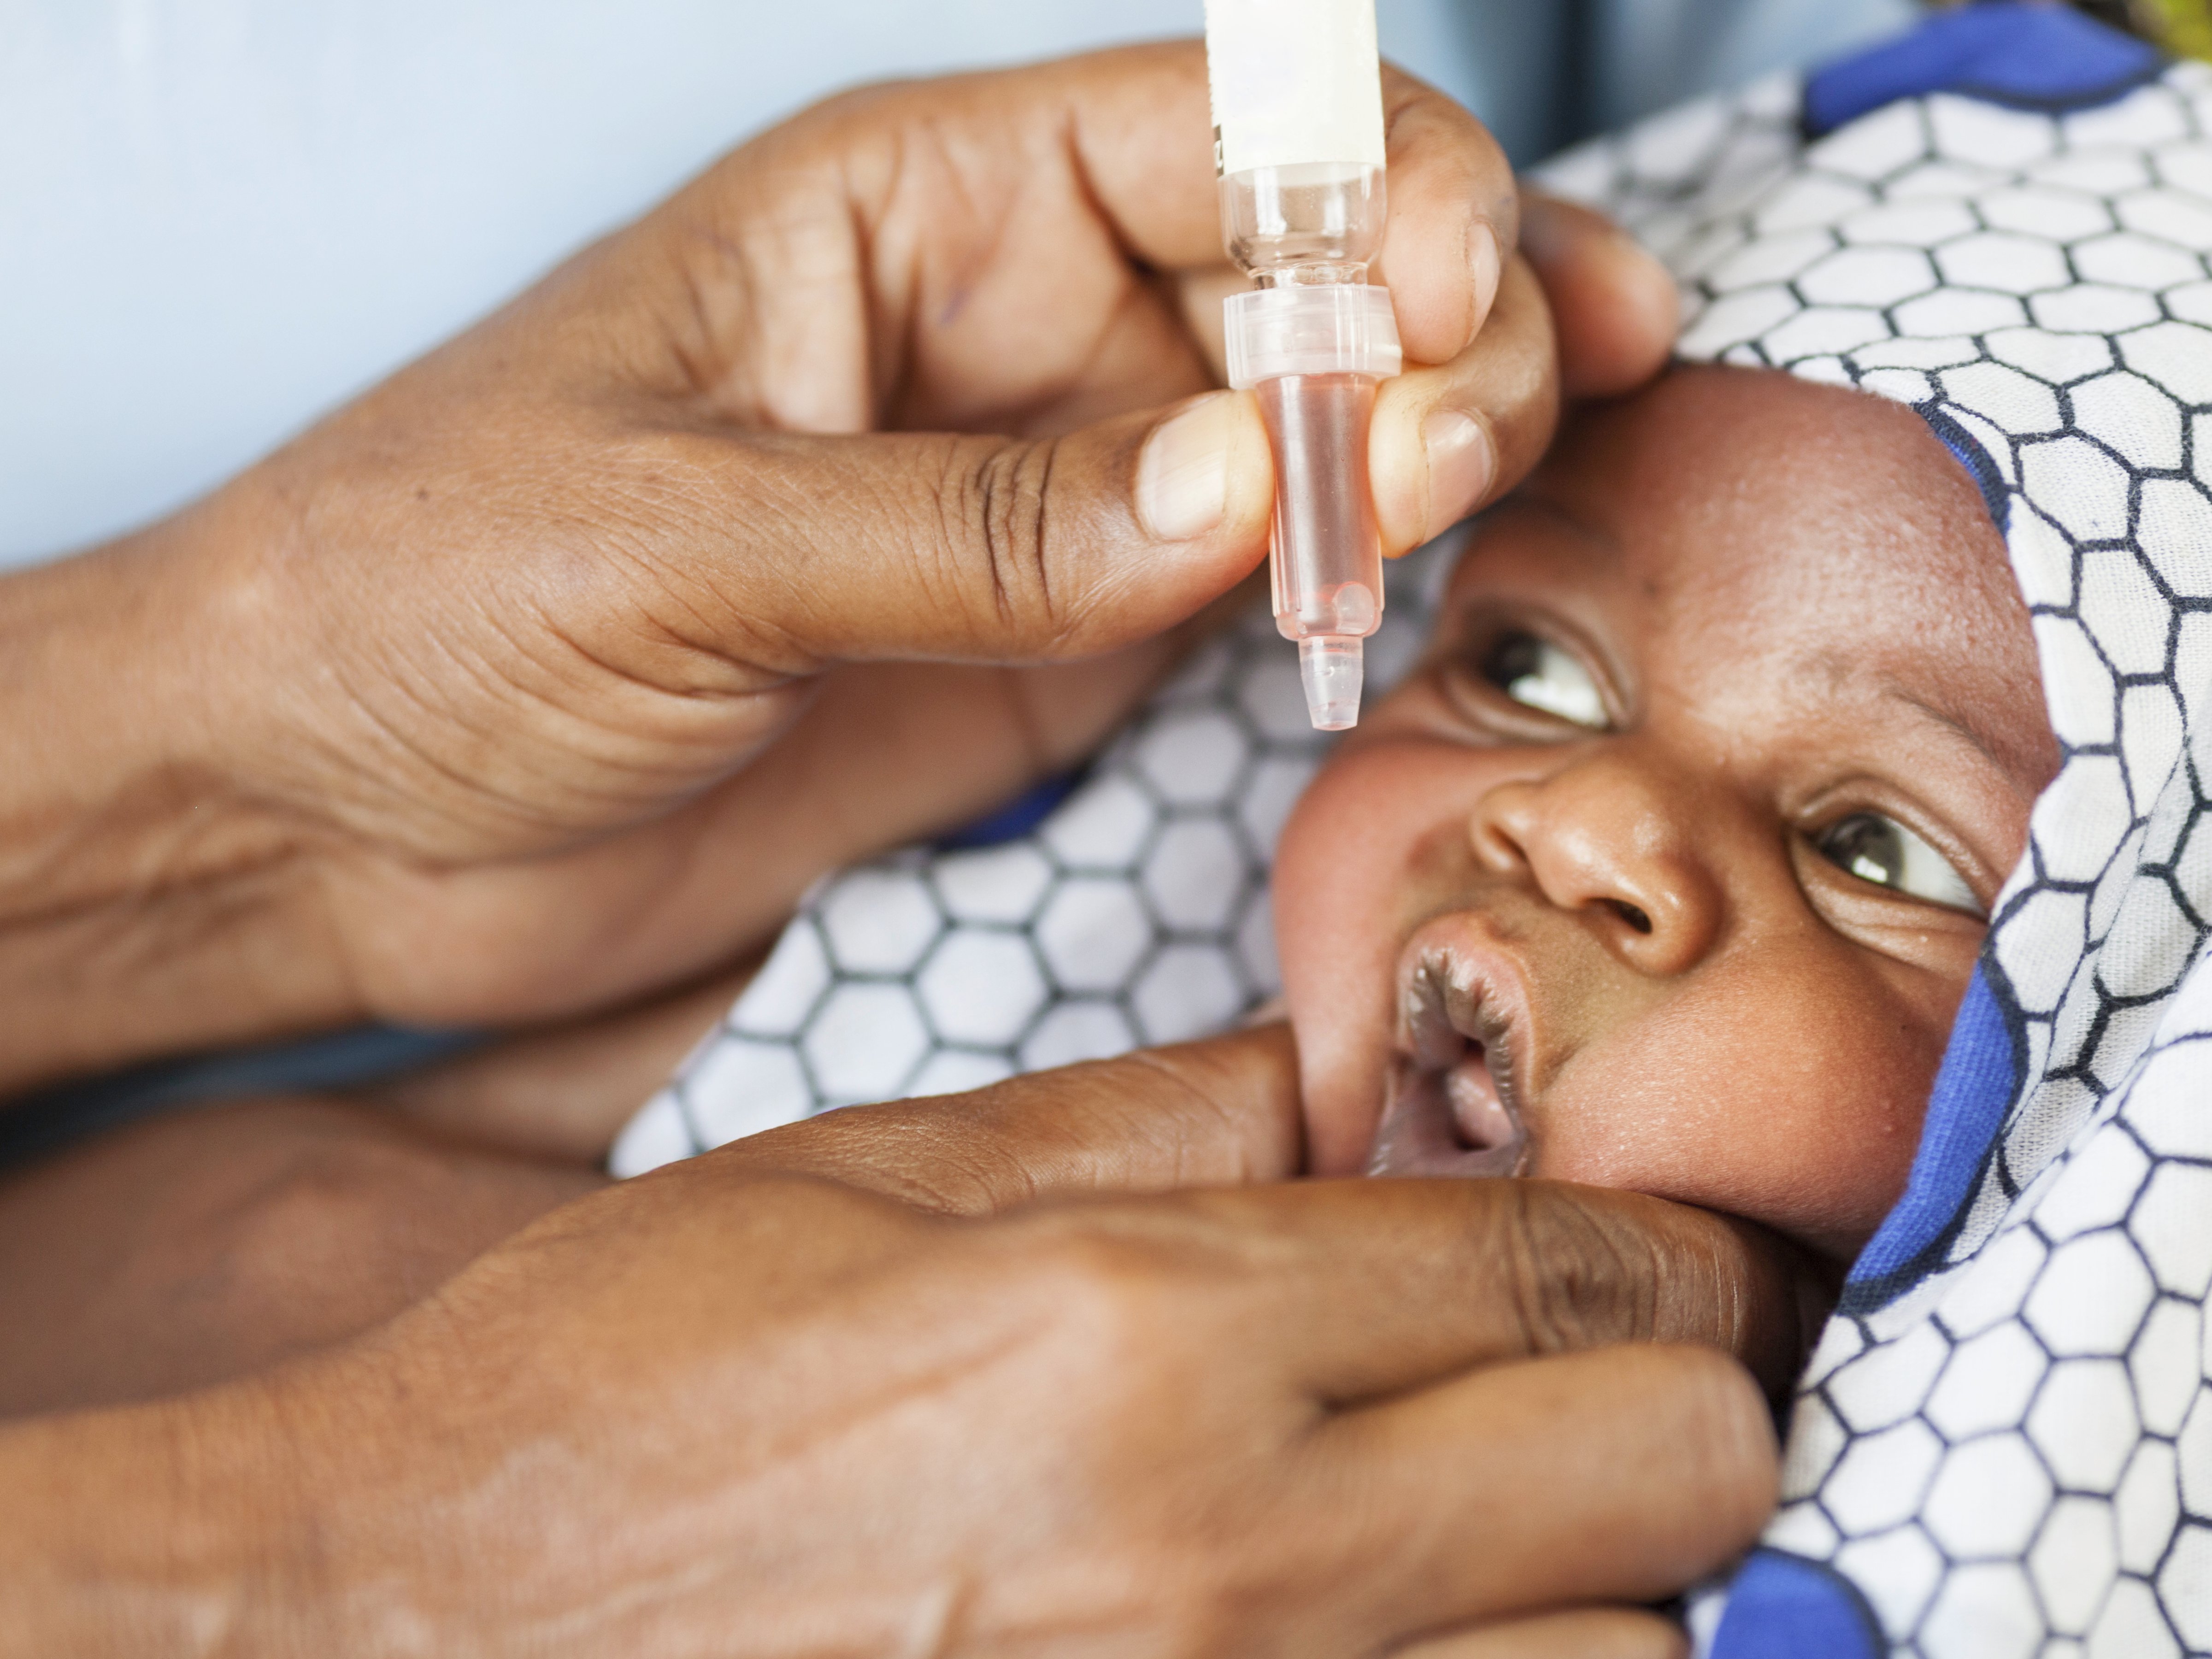 Safe baby: a child in Africa receives an oral vaccine